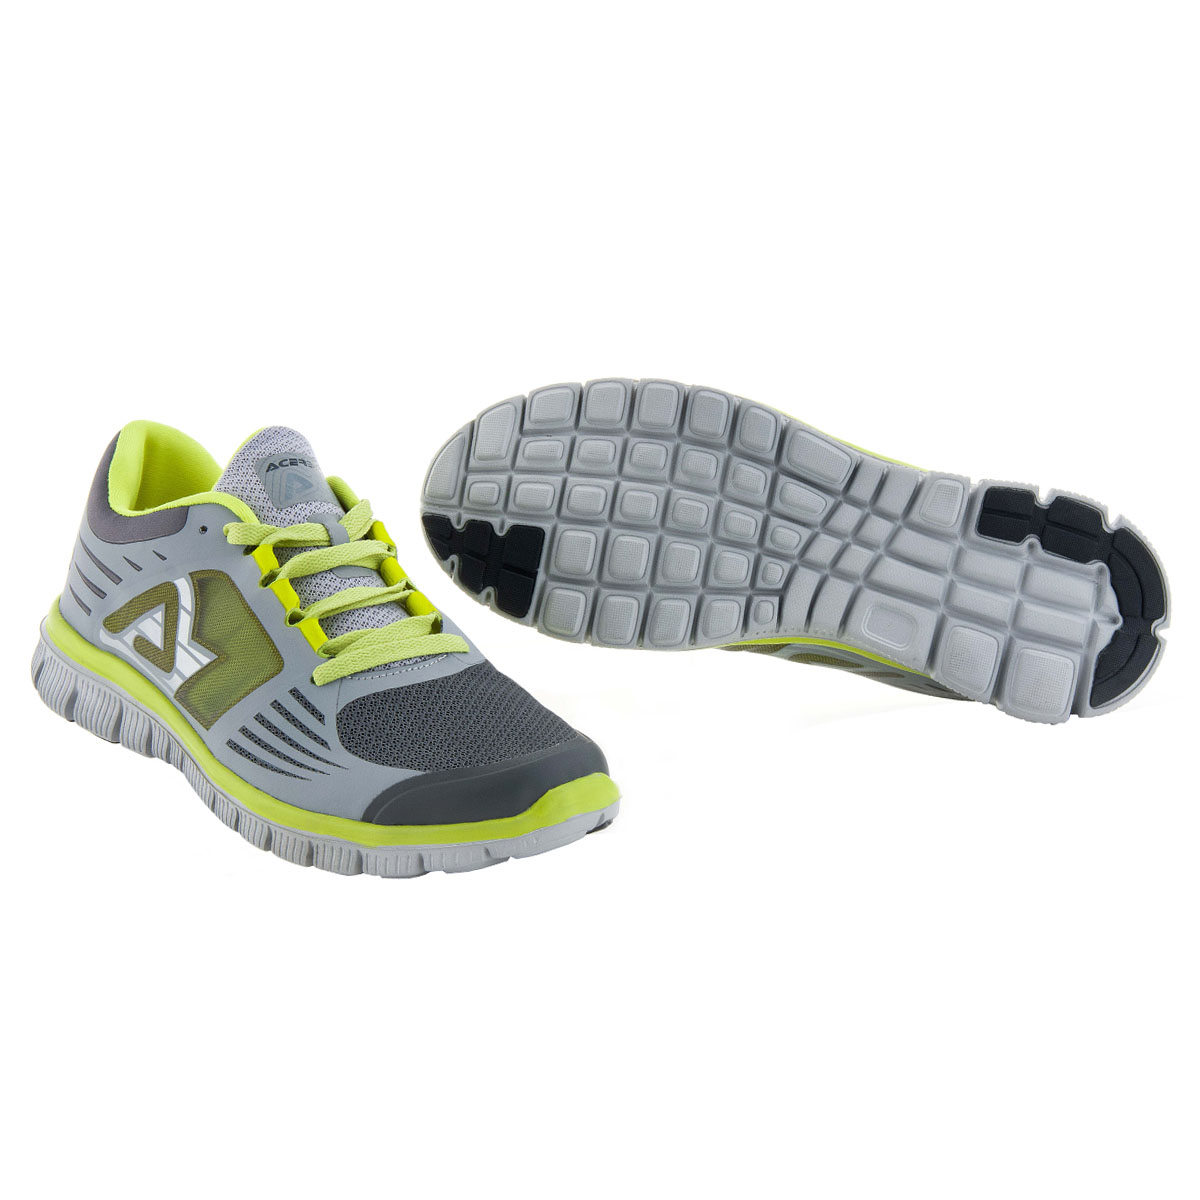 Acerbis Running Shoes Corporate Grey/Fluo Yellow